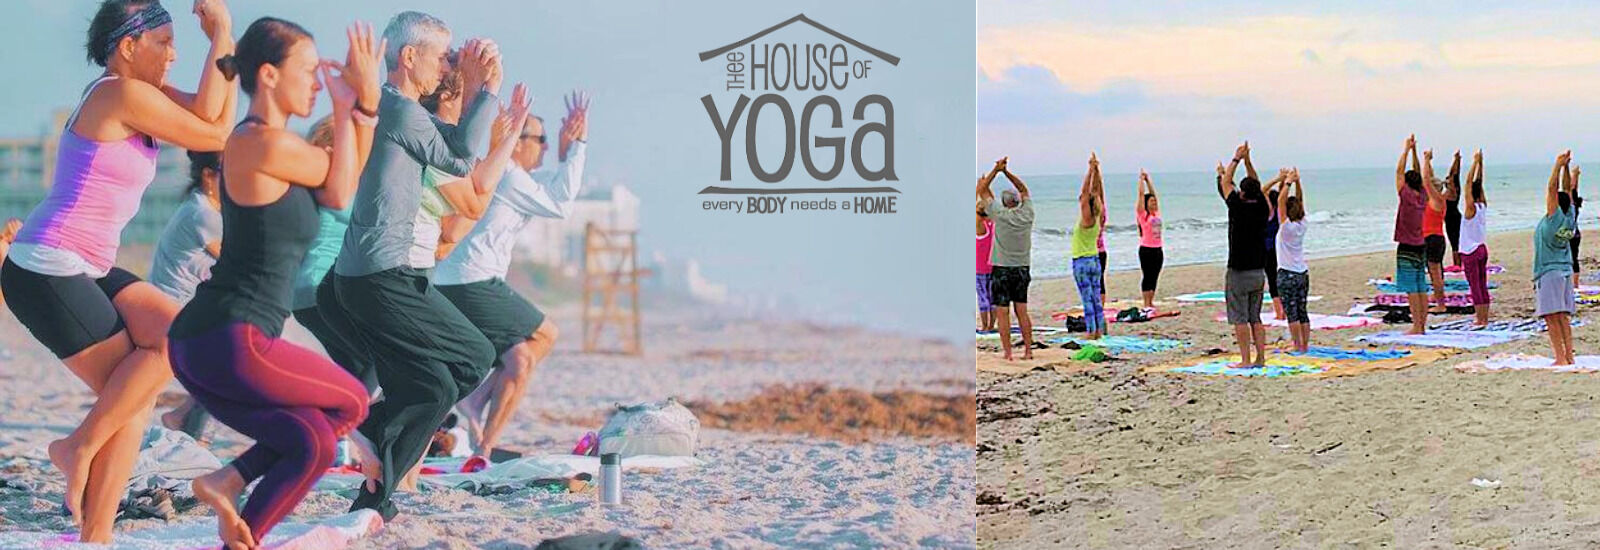 Beach Yoga Classes at Indialantic Beach by Melbourne, Florida